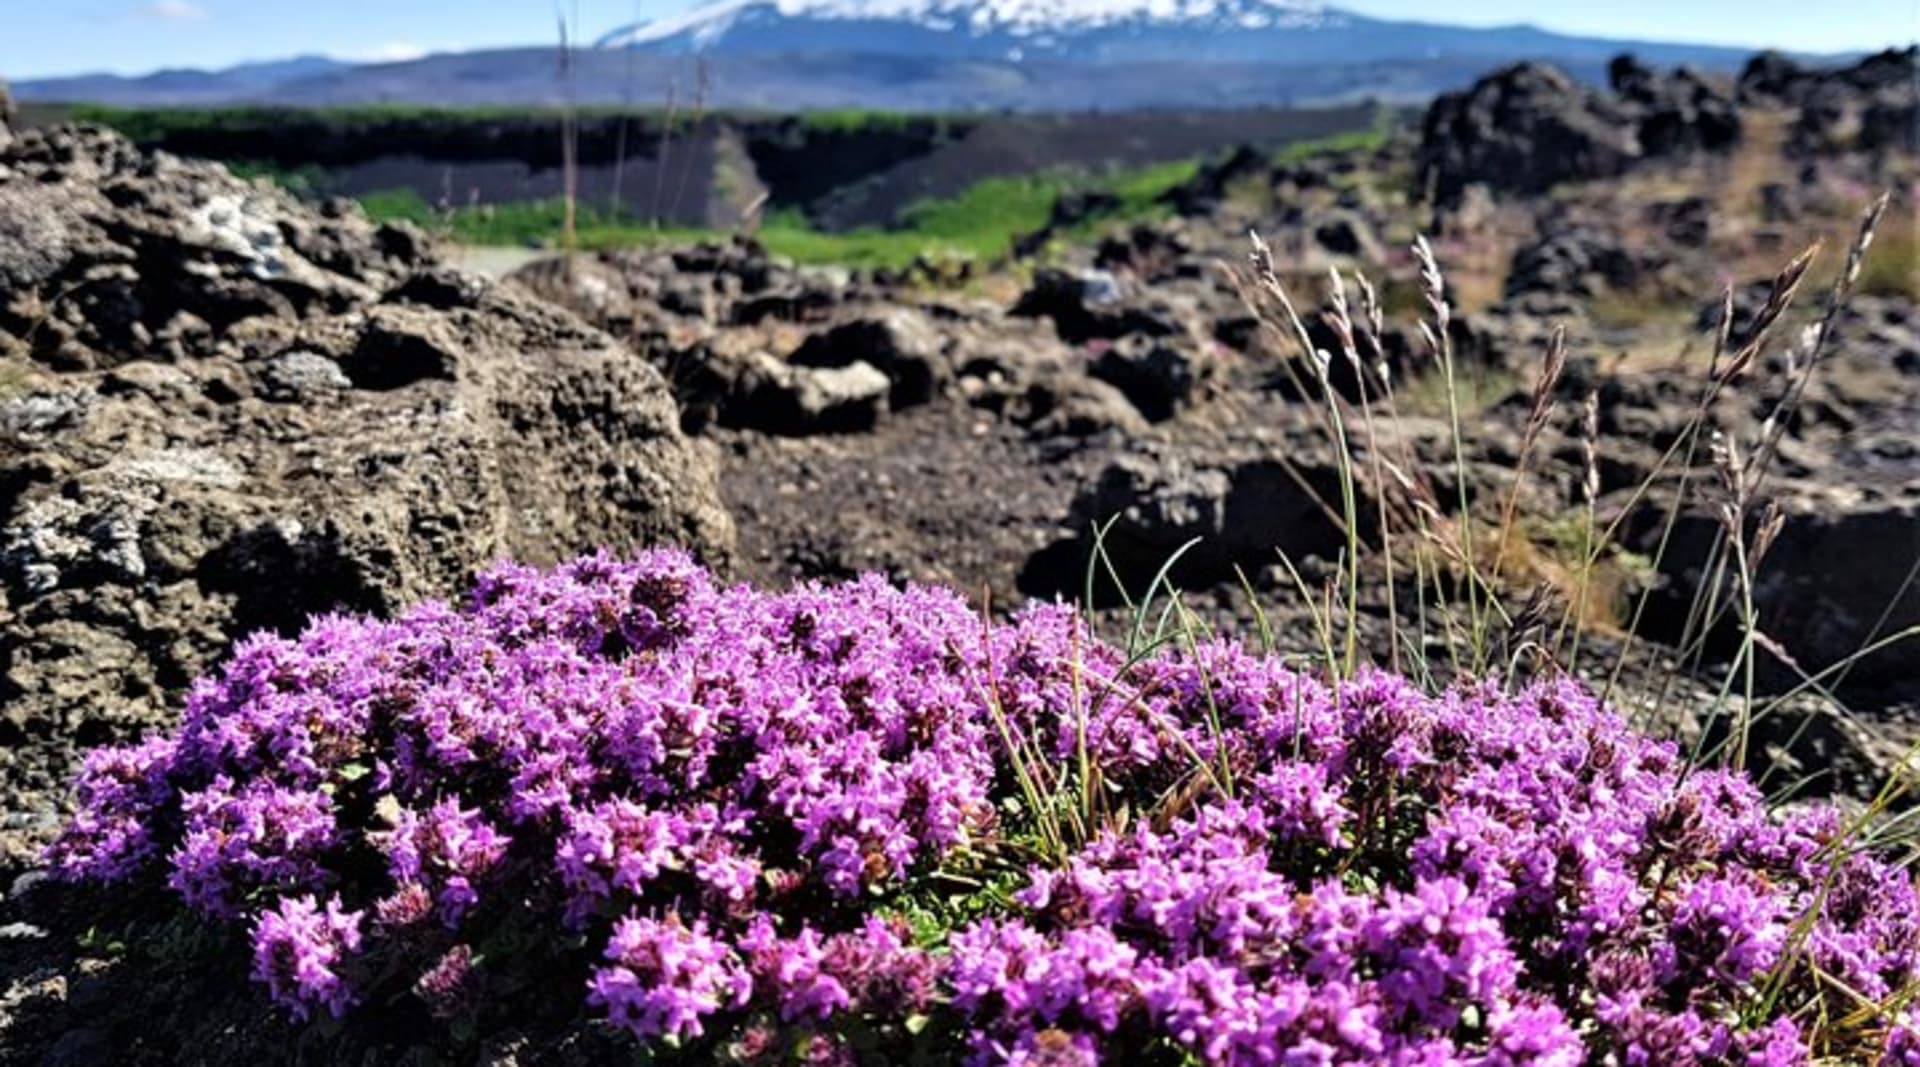 The arctic Thyme blooming and the volcano Hekla in the background